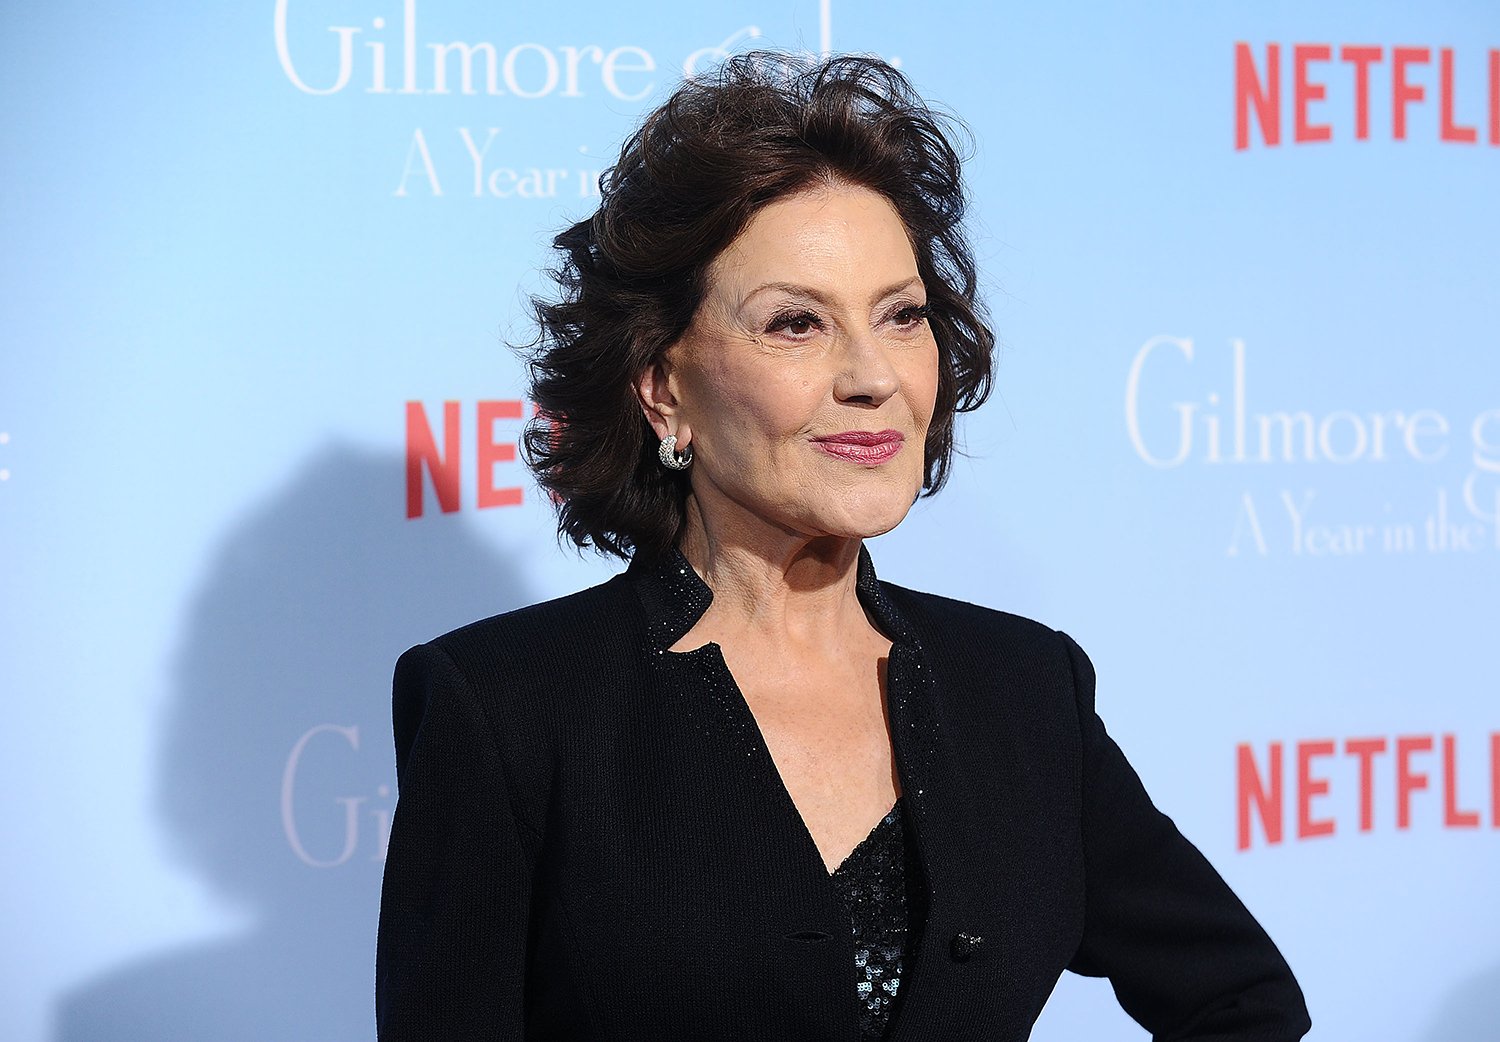 Kelly Bishop Revealed The Very Funny Reason It Took Her A While To Watch The Gilmore Girls